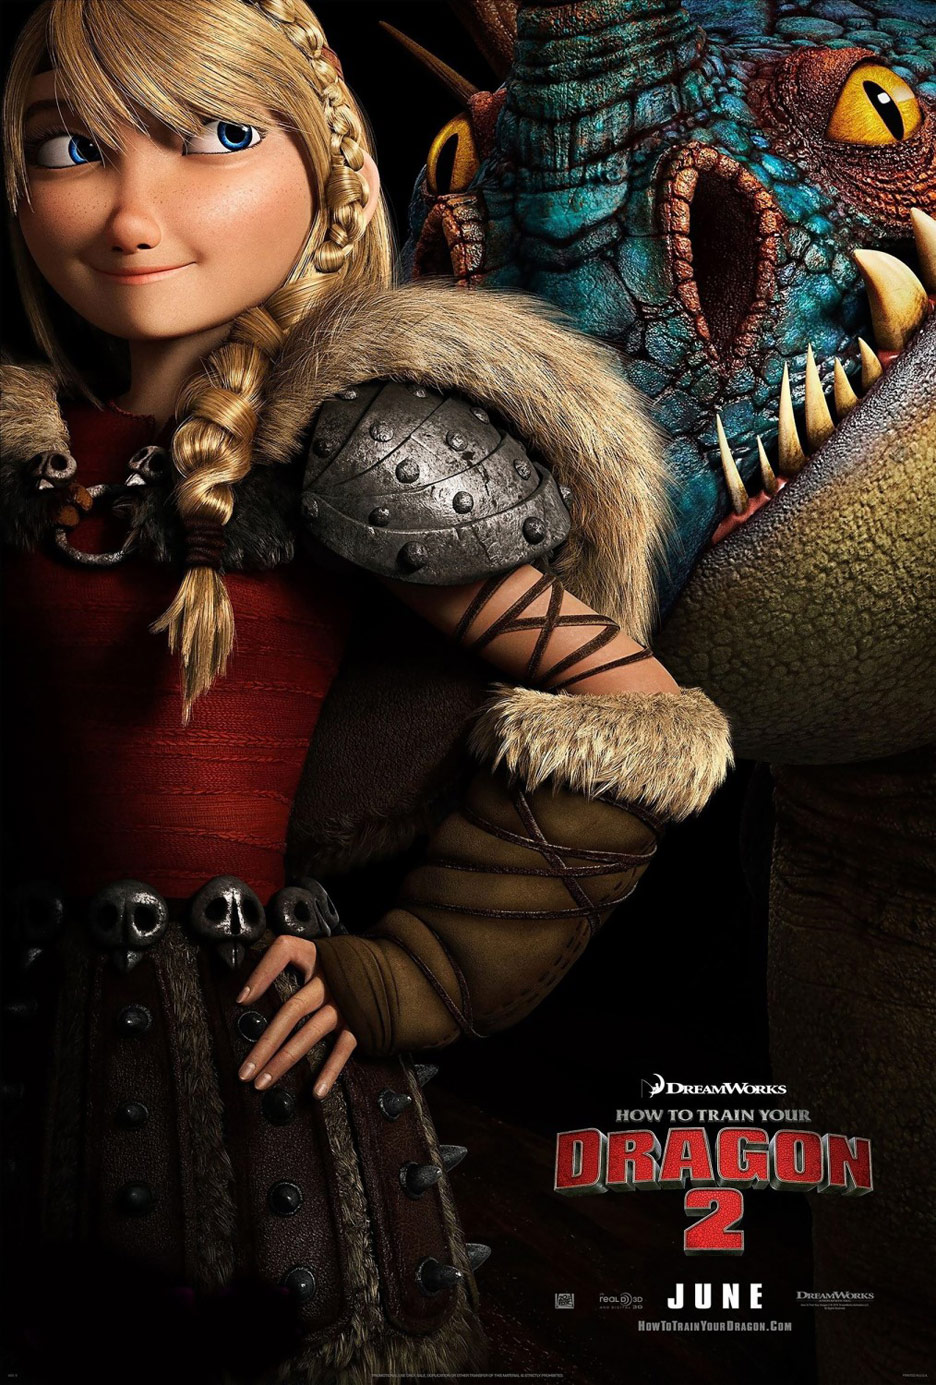 How To Train Your Dragon 2 2014 Poster 12 Trailer Addict